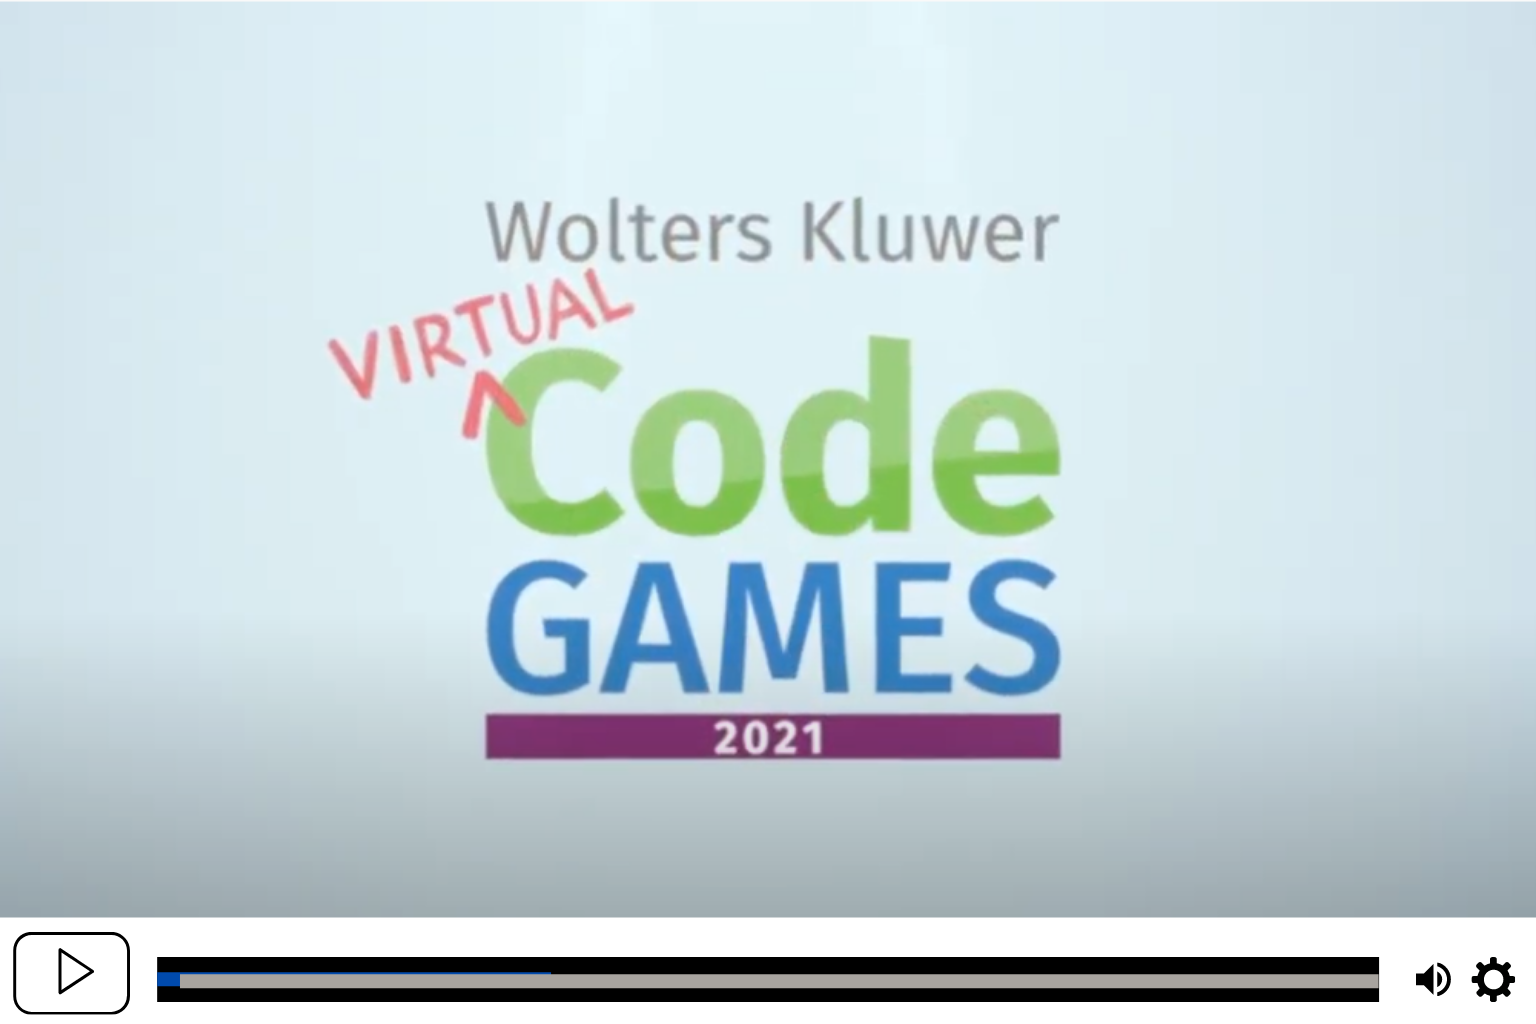 2021 Wolters Kluwer Code Games